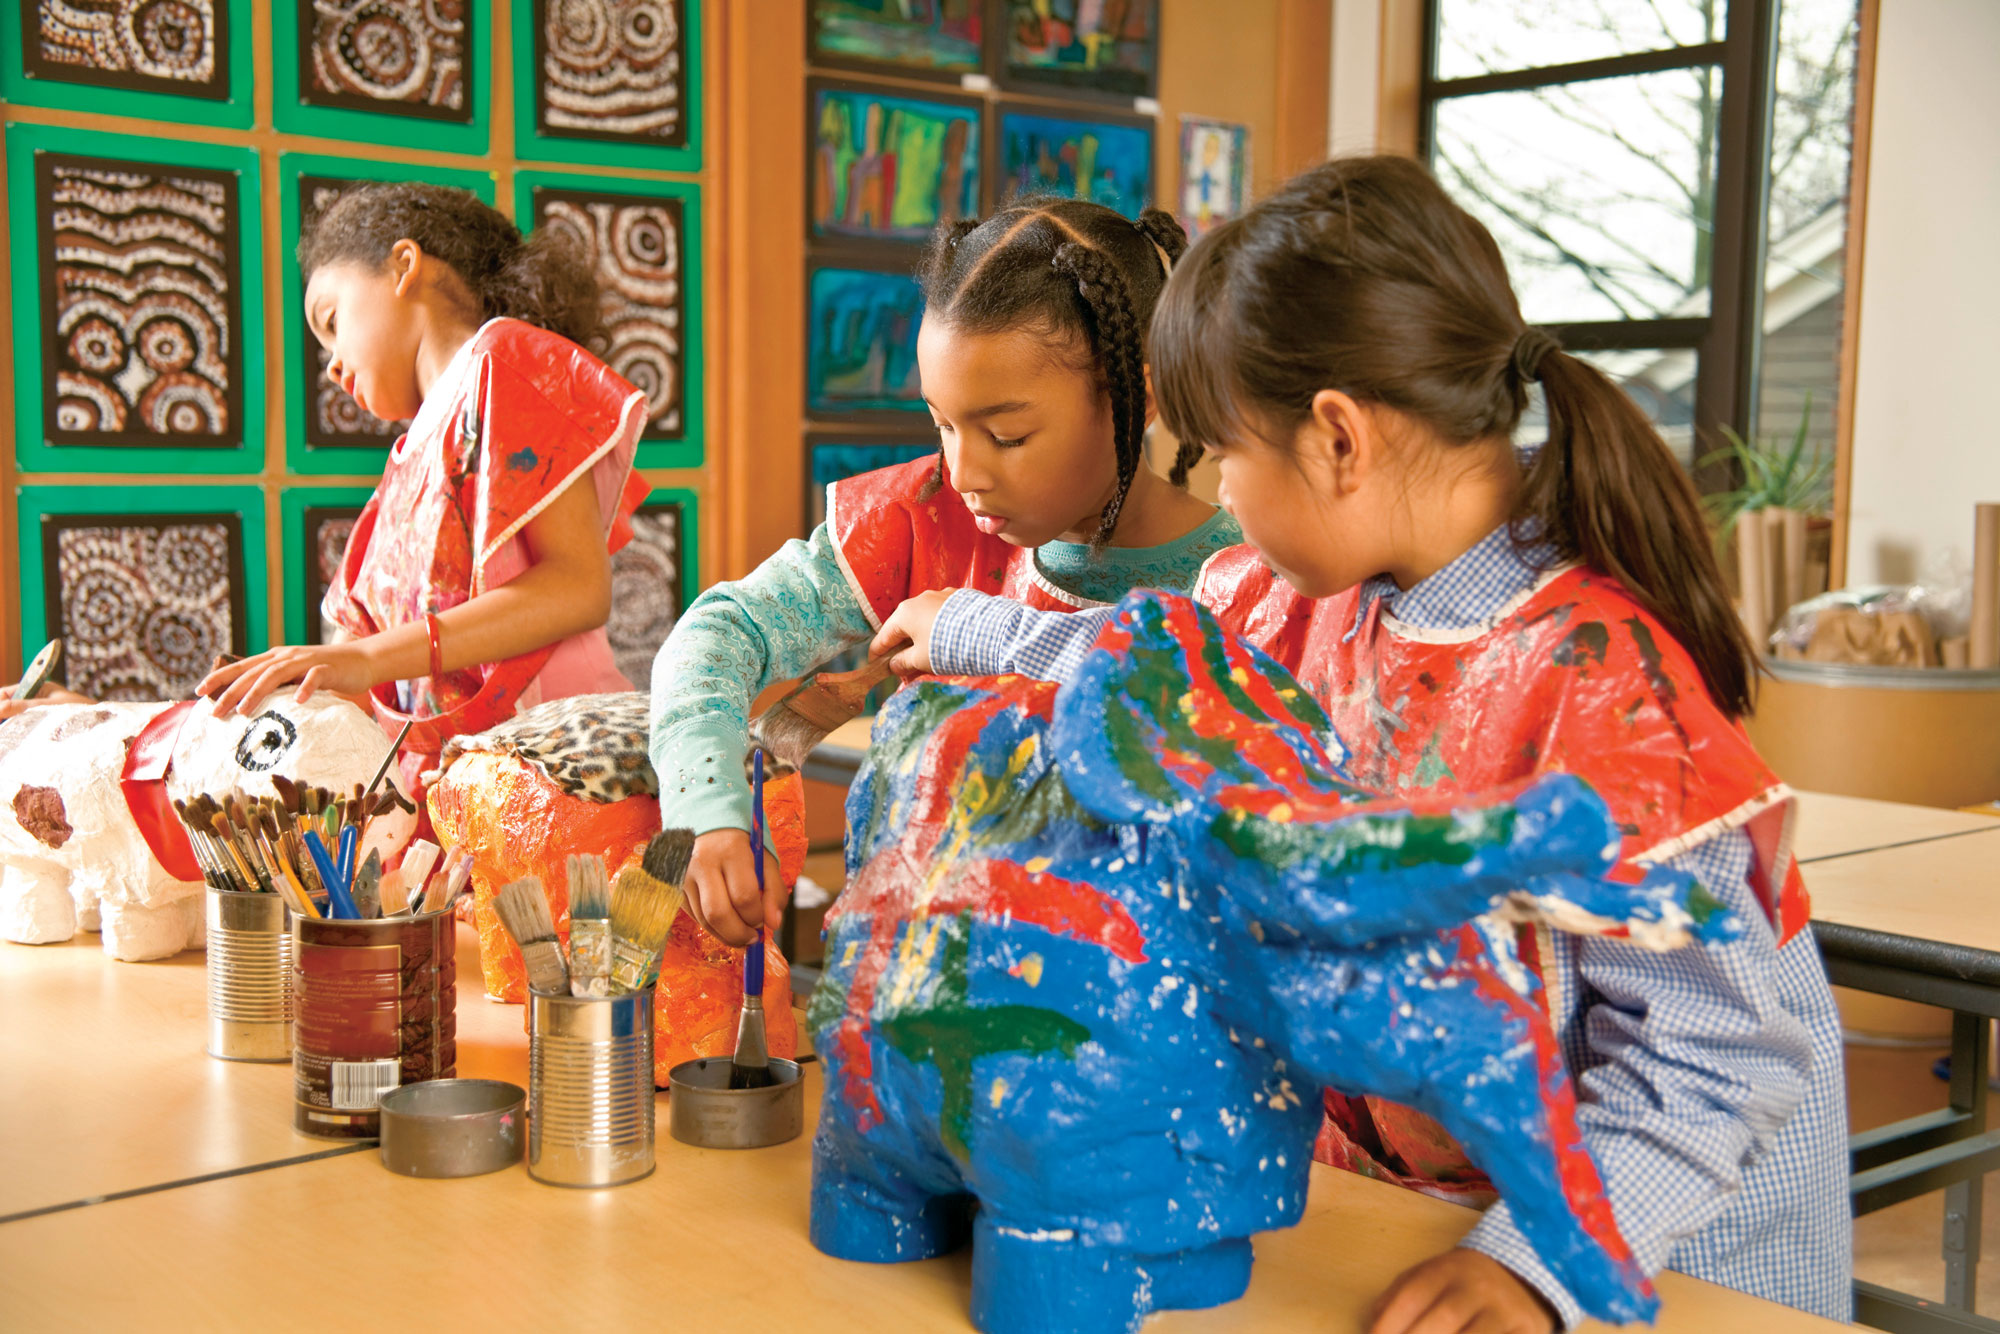 Group of children painting with coloring paints in art class.